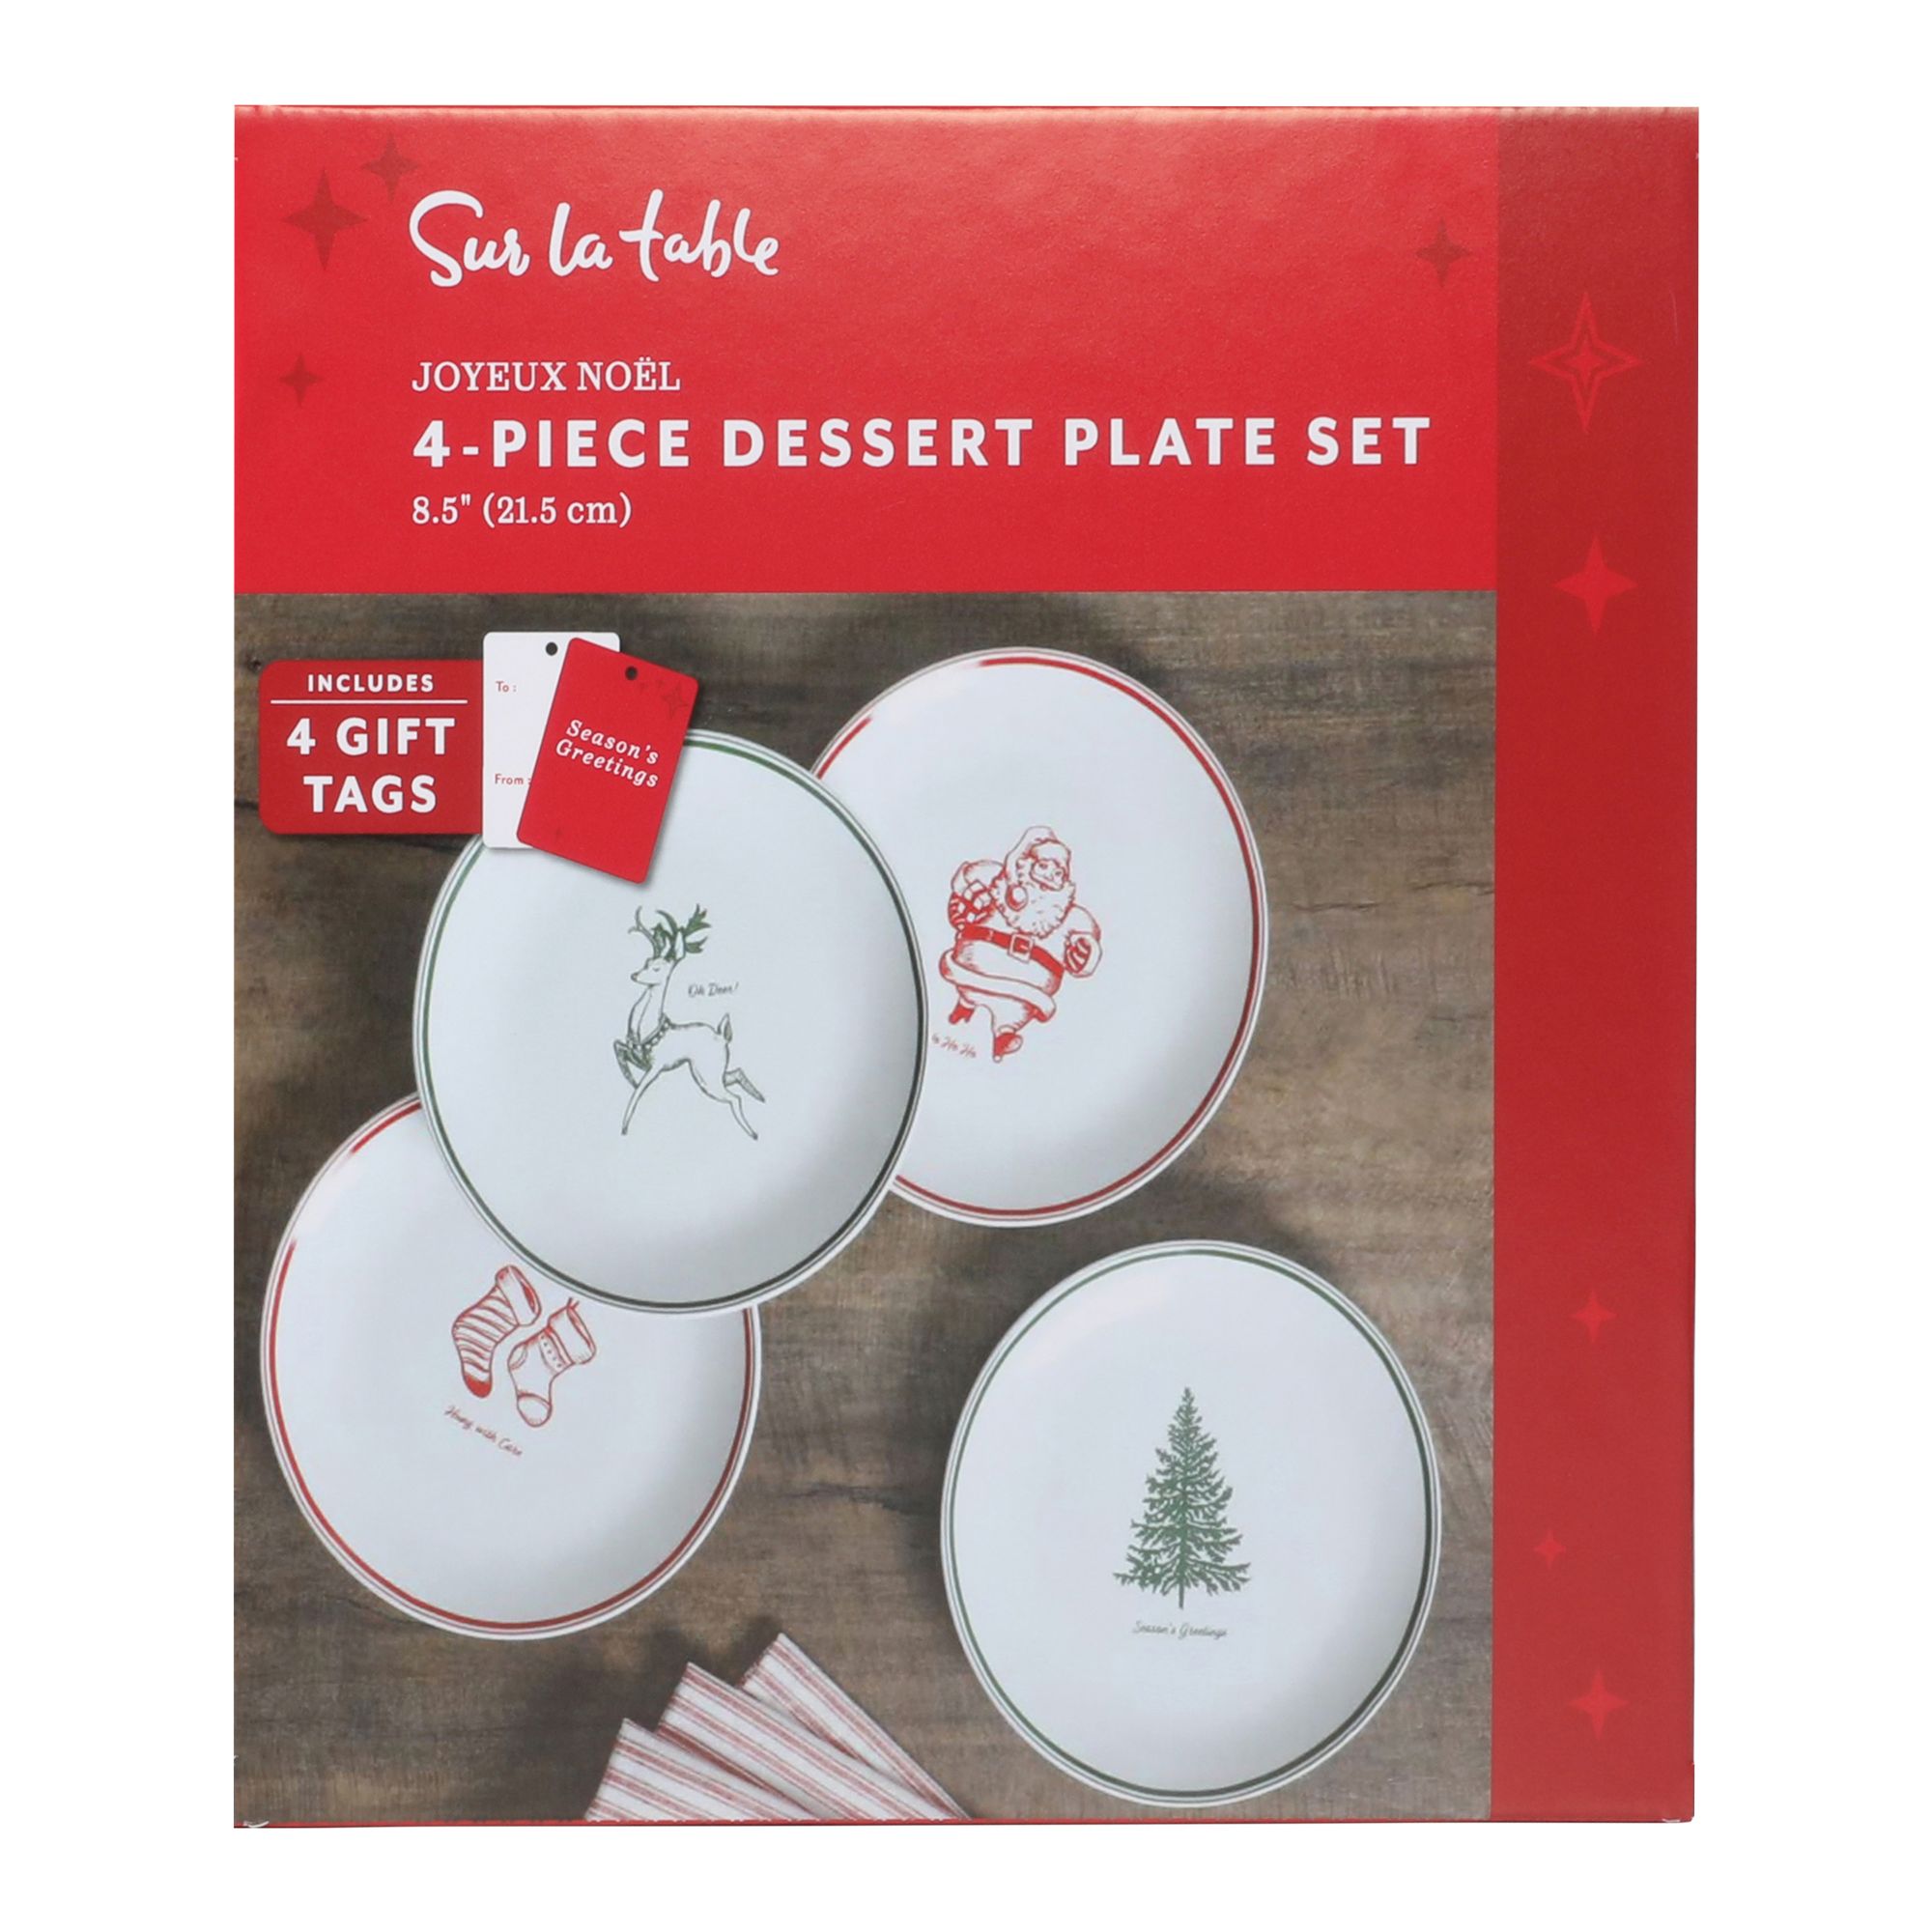 Chinet 6.5 Classic White Appetizer and Dessert Plates, 300 ct